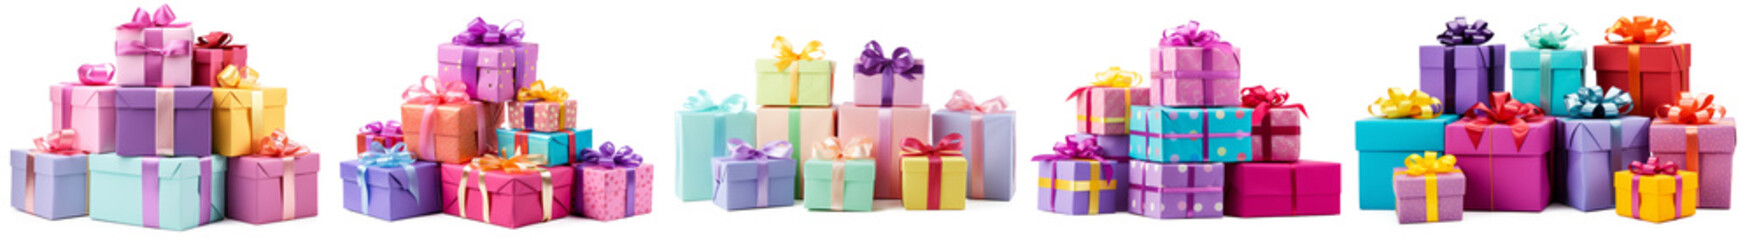 Pile of Colorful birthday gift boxes isolated on transparent background. set of birthday gifts